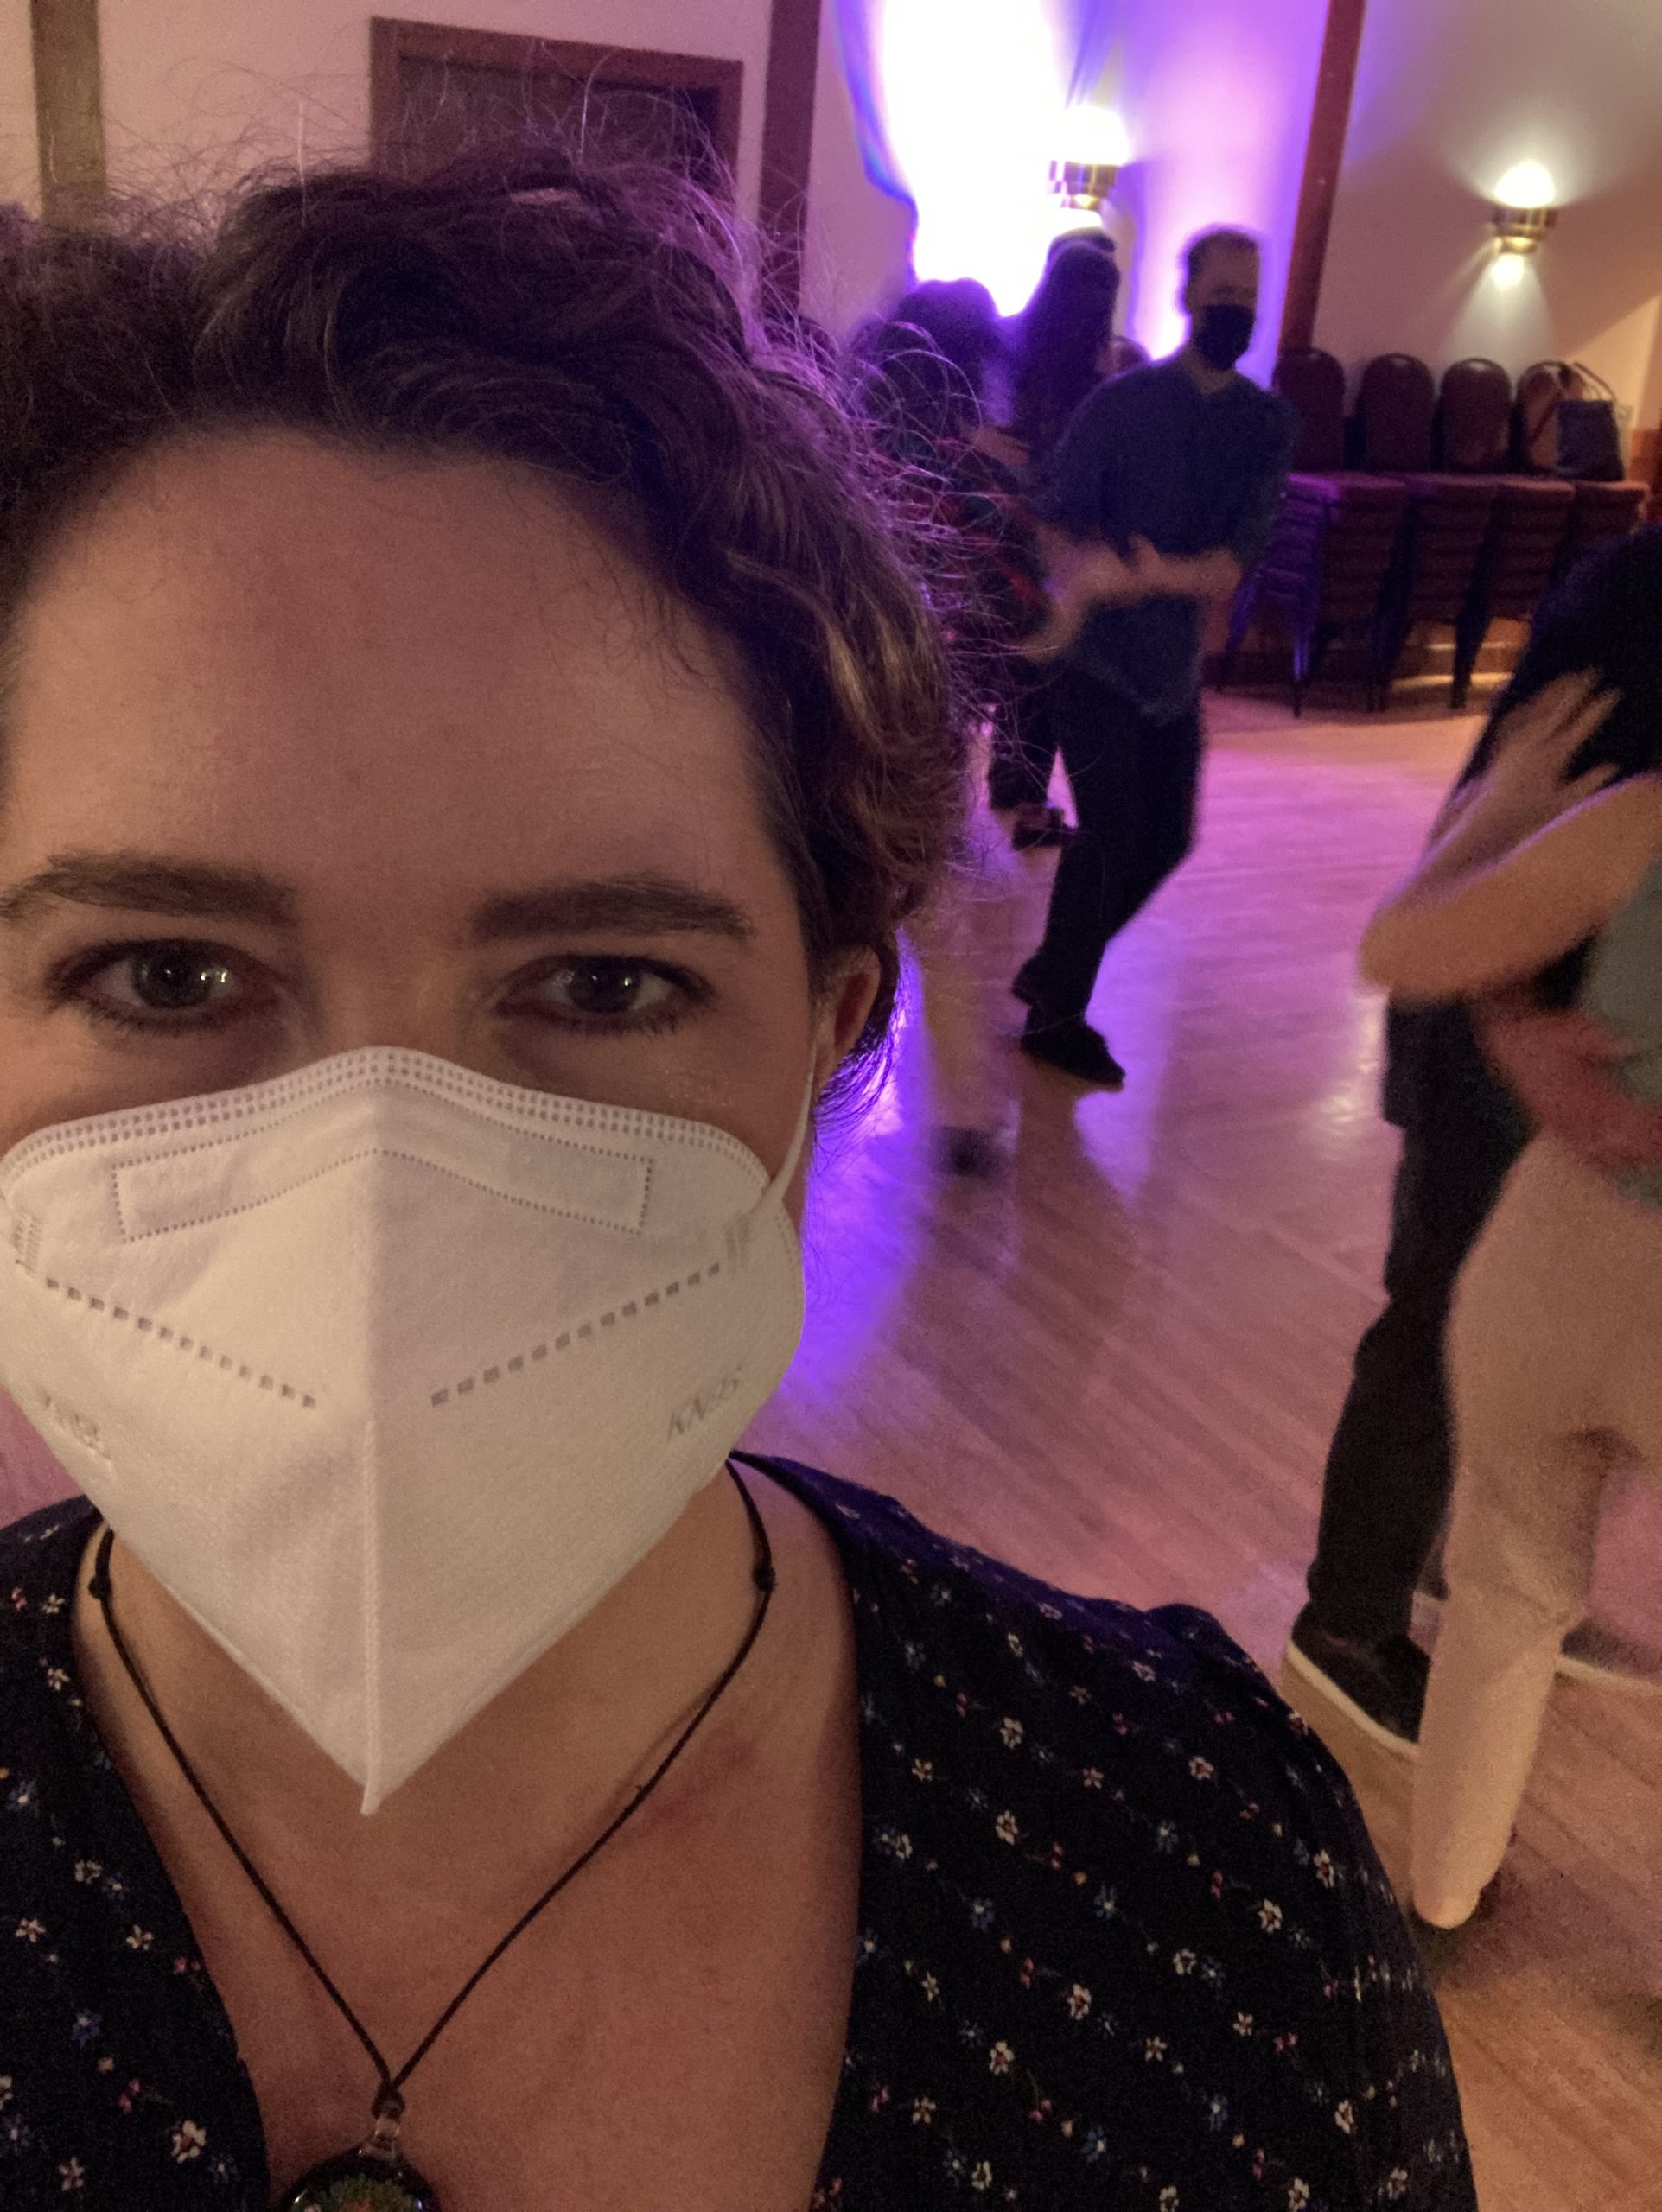 On Masks and the Swing Dance Community